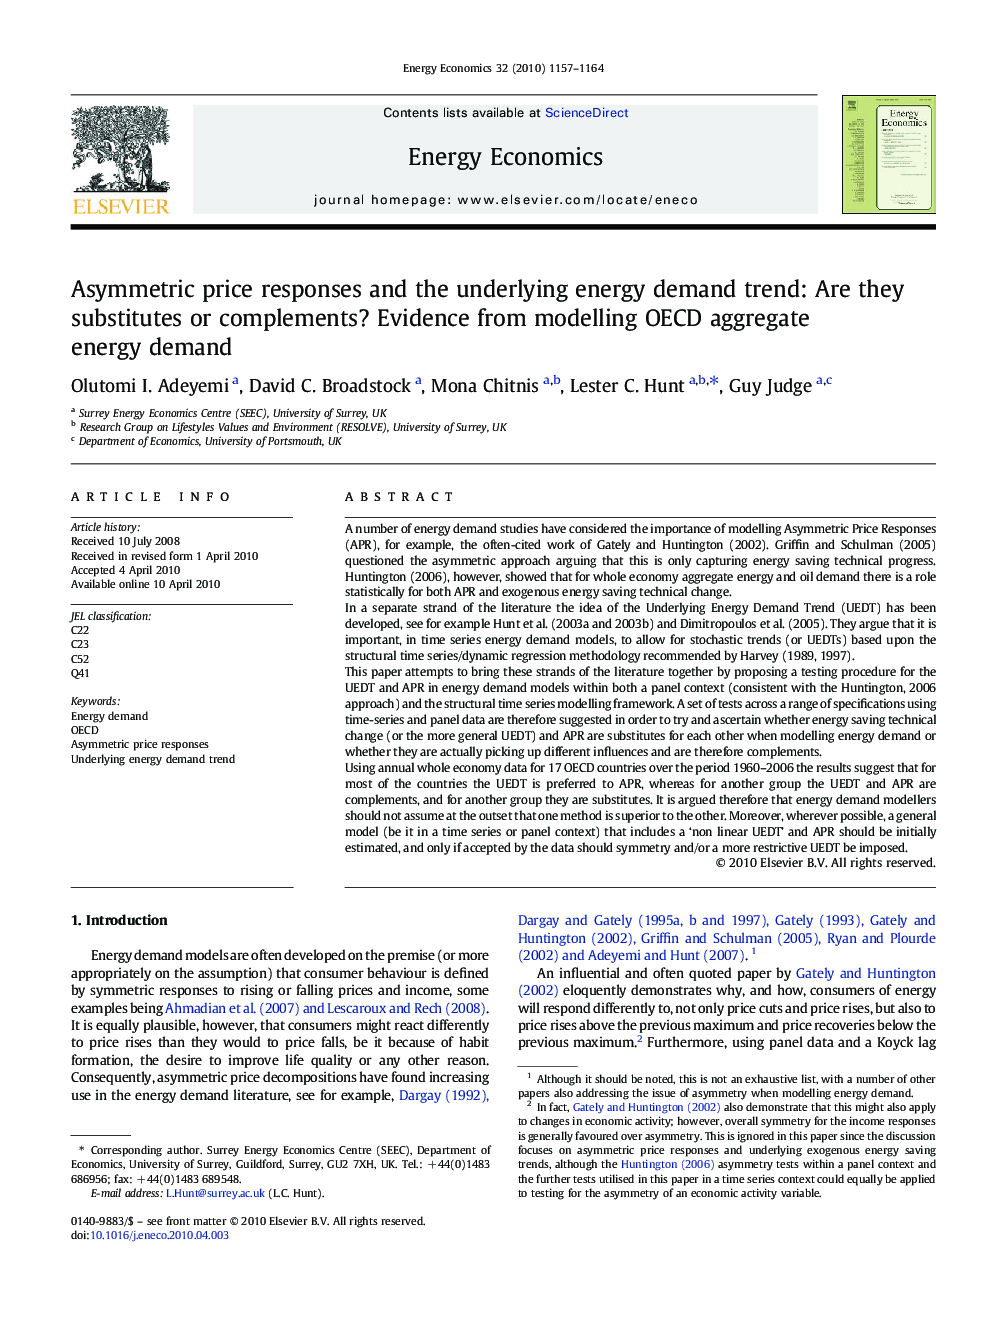 Asymmetric price responses and the underlying energy demand trend: Are they substitutes or complements? Evidence from modelling OECD aggregate energy demand